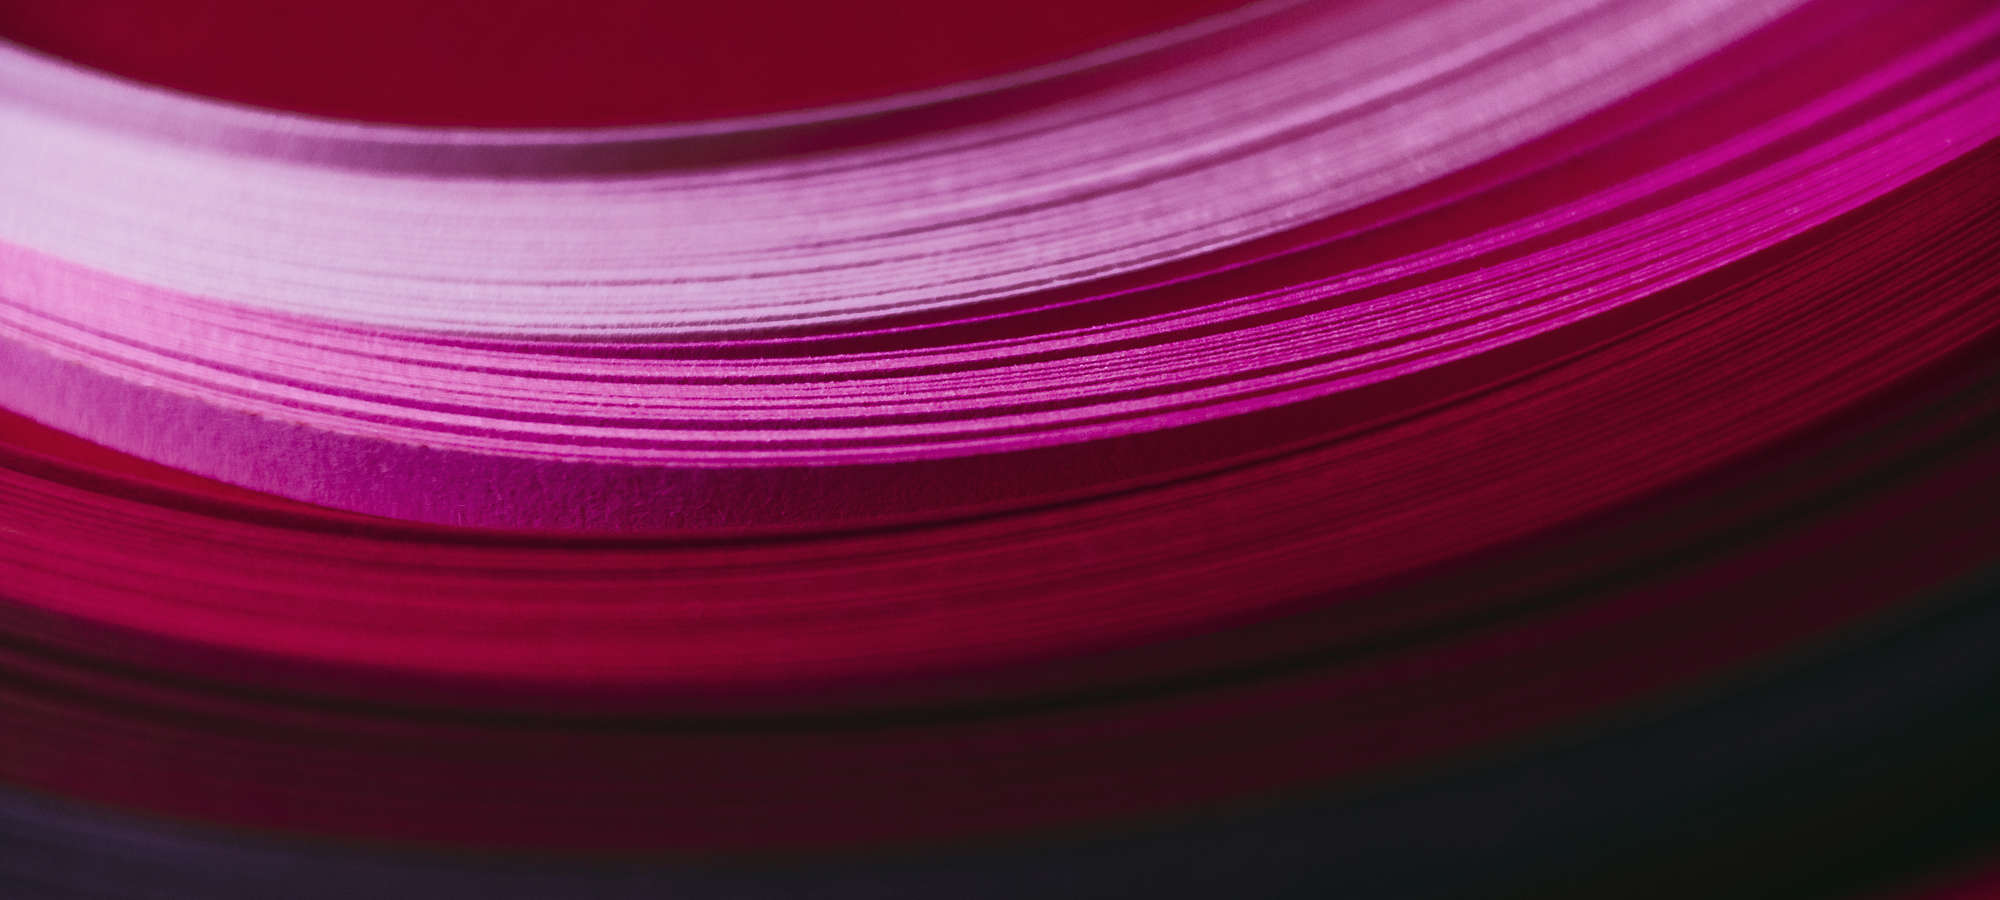 Abstract pink red paper wave